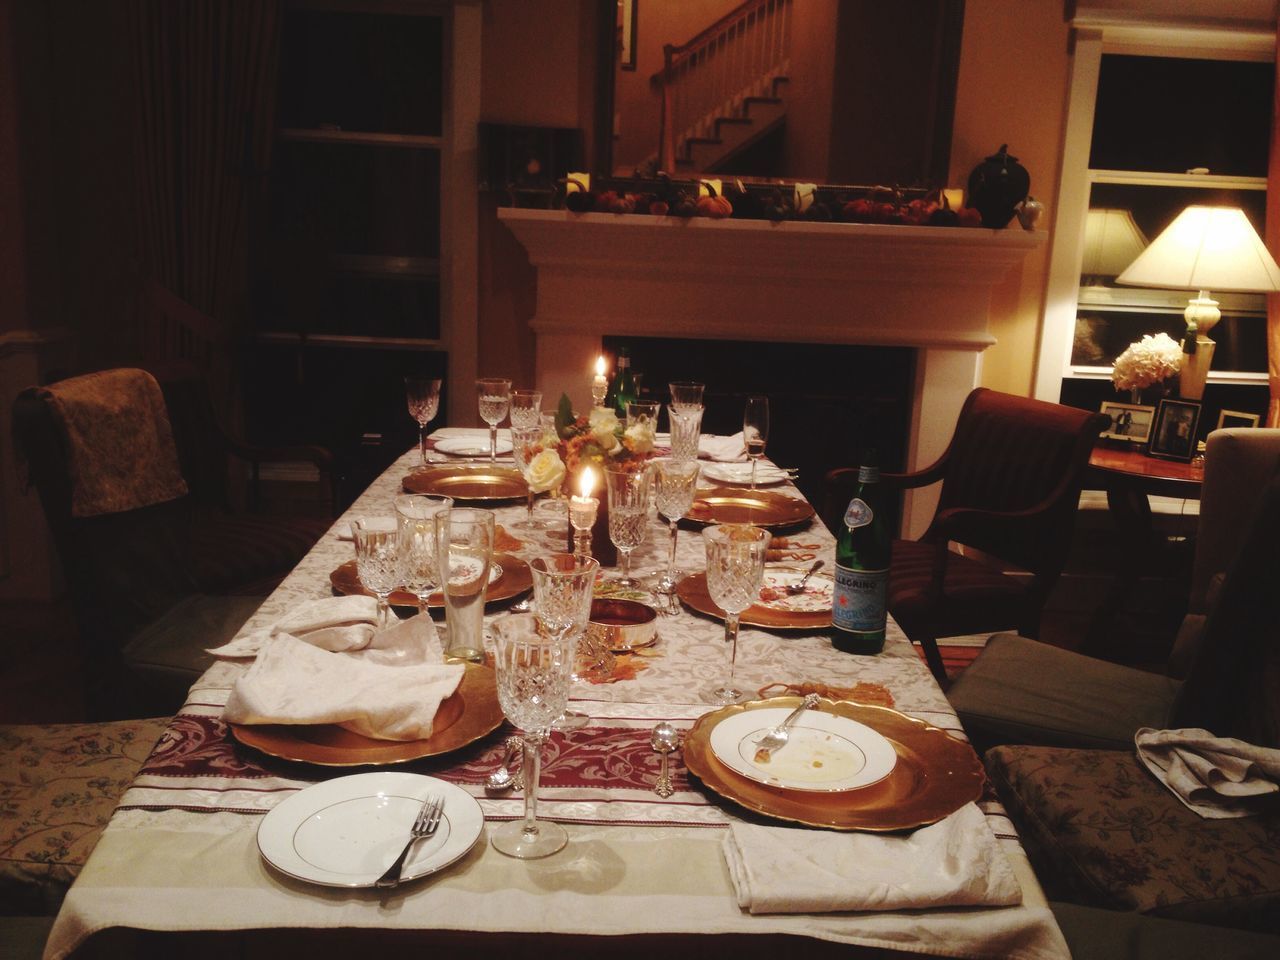 VIEW OF DINING TABLE